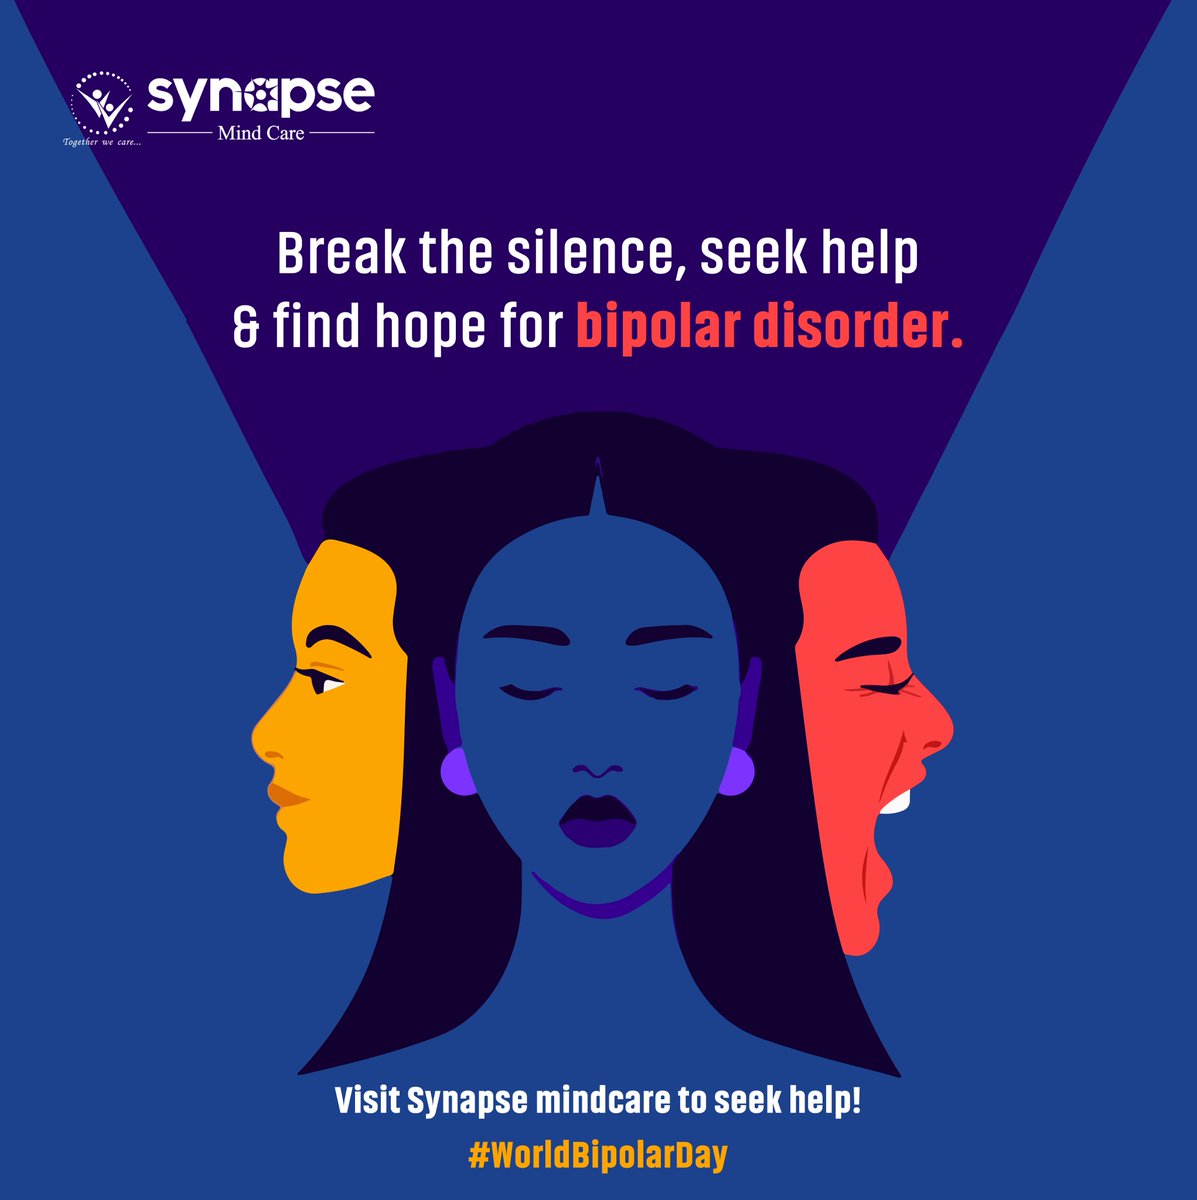 Remember, you are not alone in this journey. Let's stand together and raise awareness for bipolar disorder.☮✅💯
.
.
.
#trending #bipolar  #worldbipolarday #bipolarawareness #mentalhealth #stress #management #mentalhealthawareness #bipolardepression #endthestigma #selfcare #love